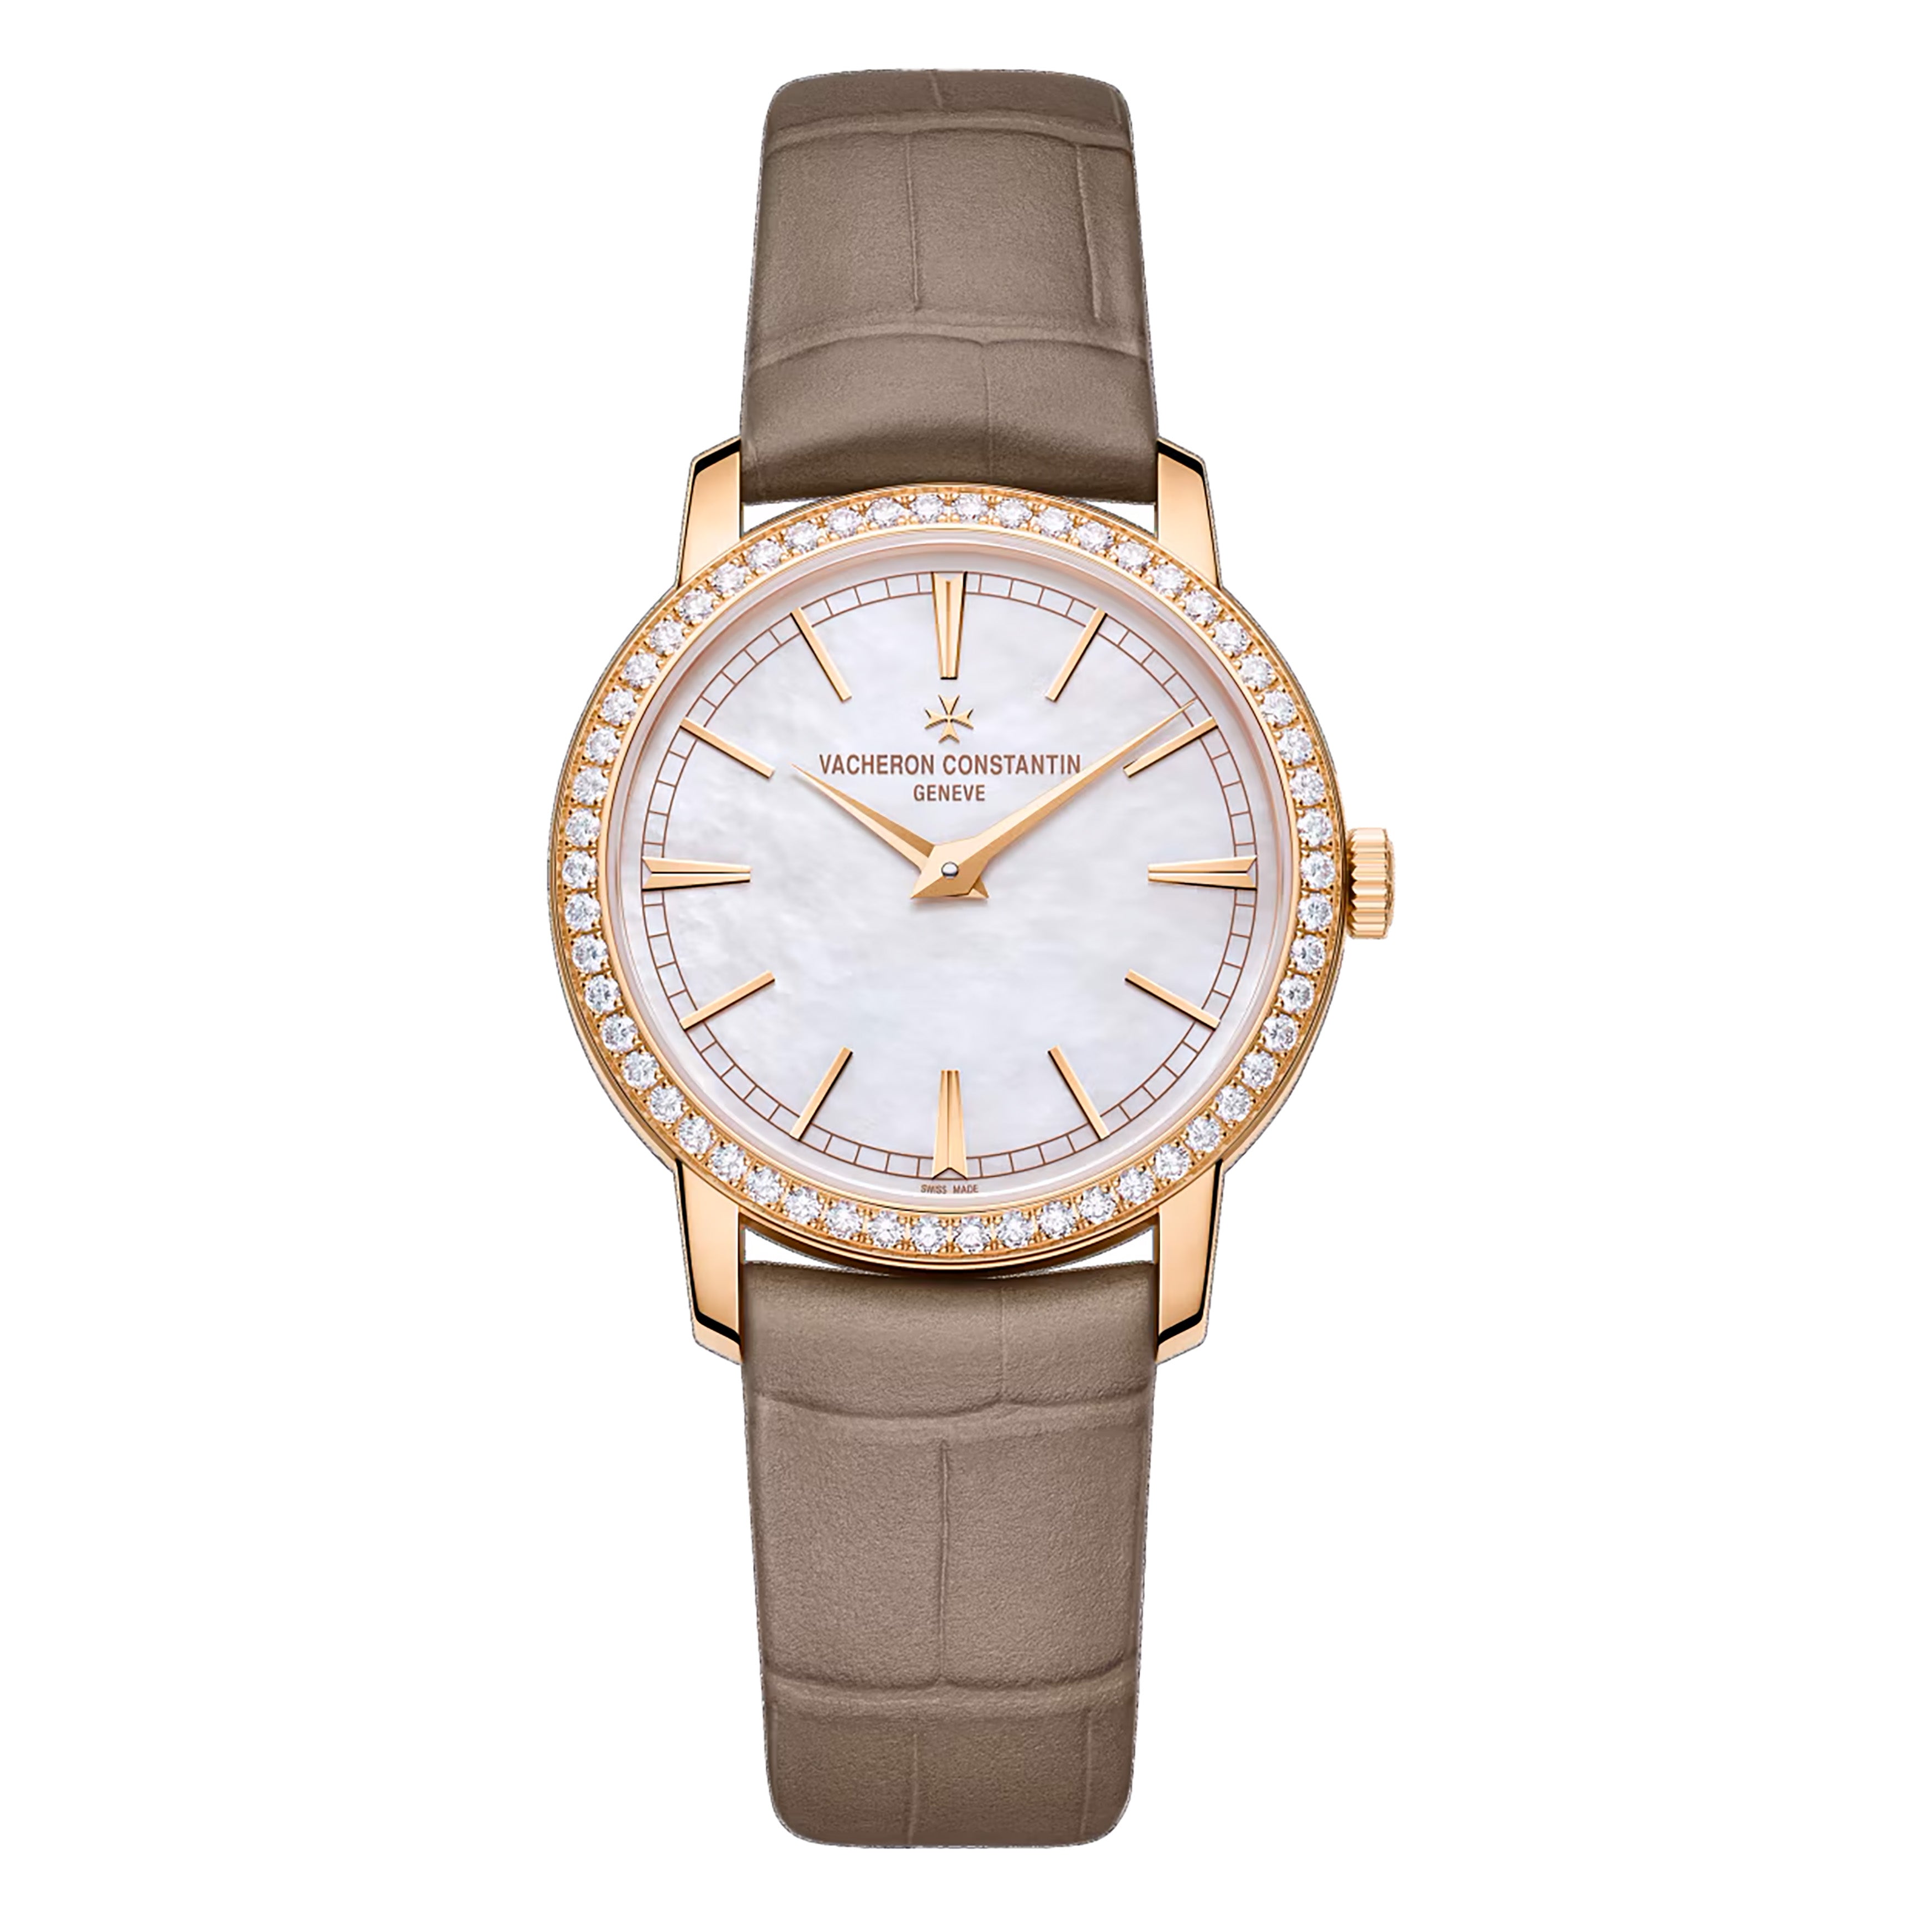 Vacheron Constantin Traditionelle Manual-Winding Watch, 33mm Mother of Pearl Dial, 1405T/000R-B636